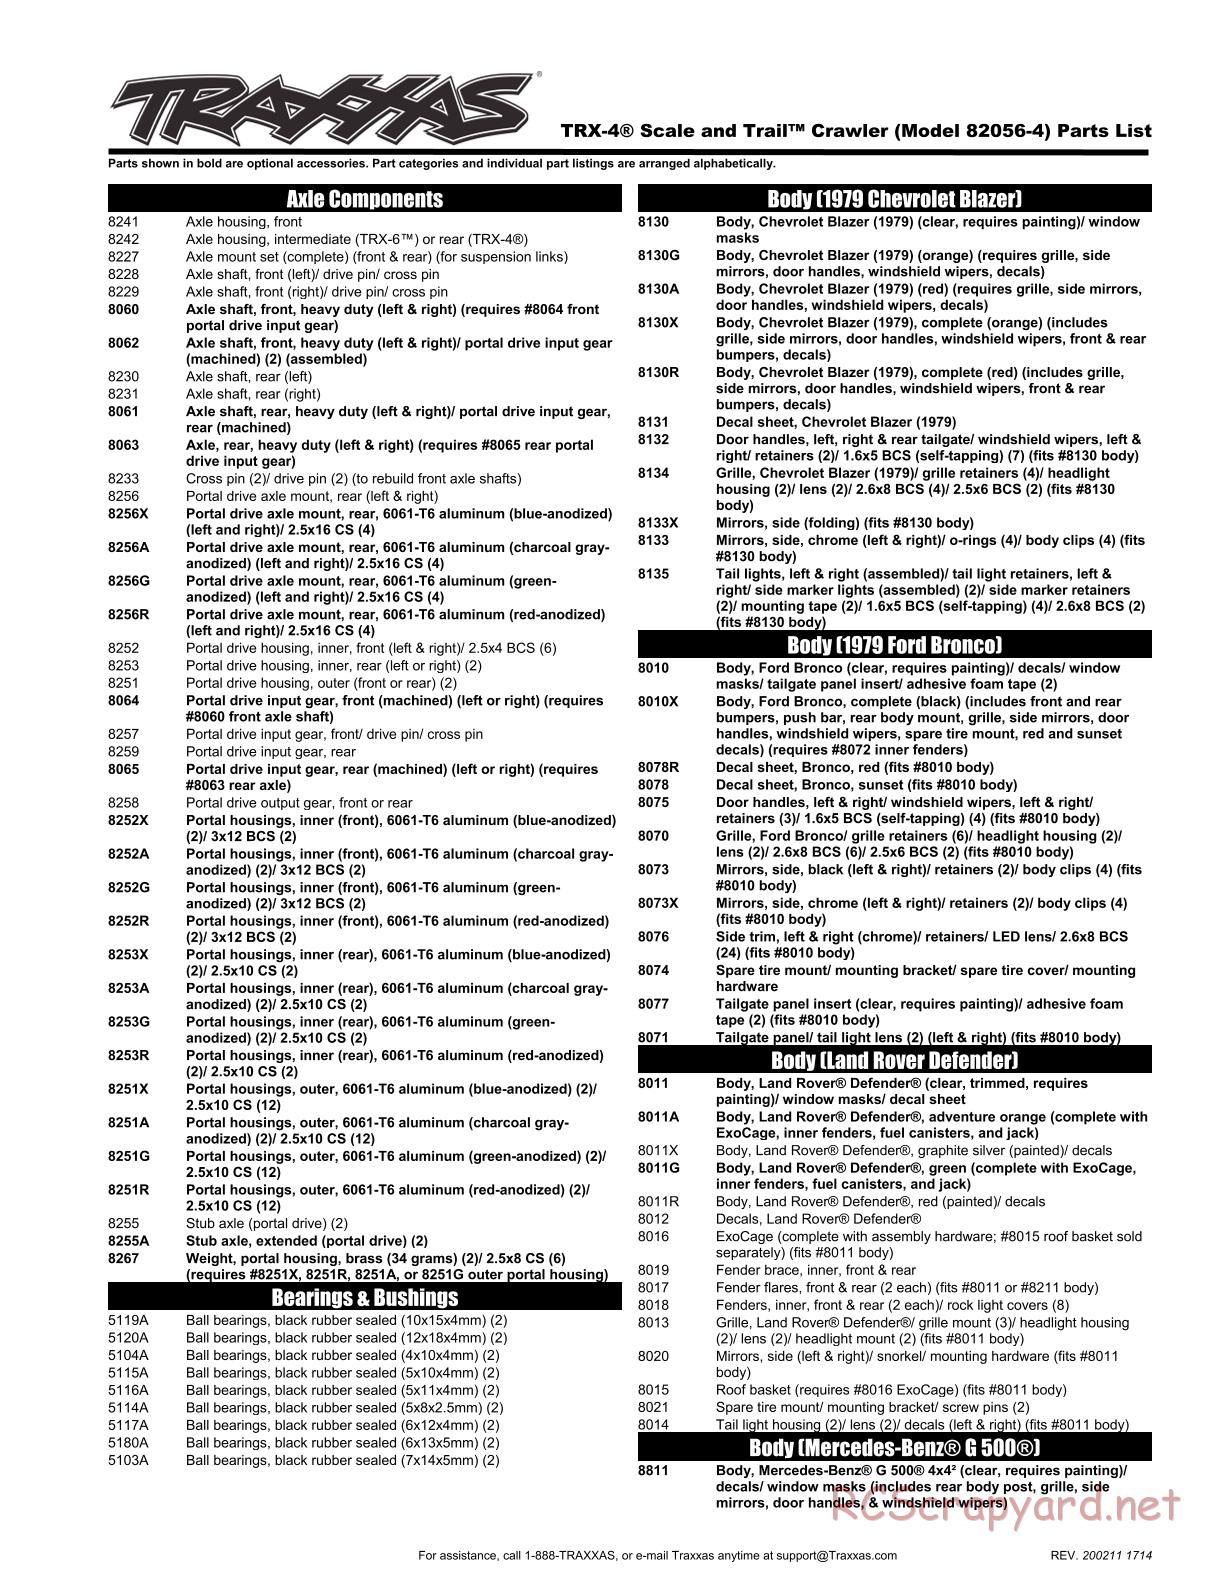 Traxxas - TRX-4 Land Rover Defender - Parts List - Page 1